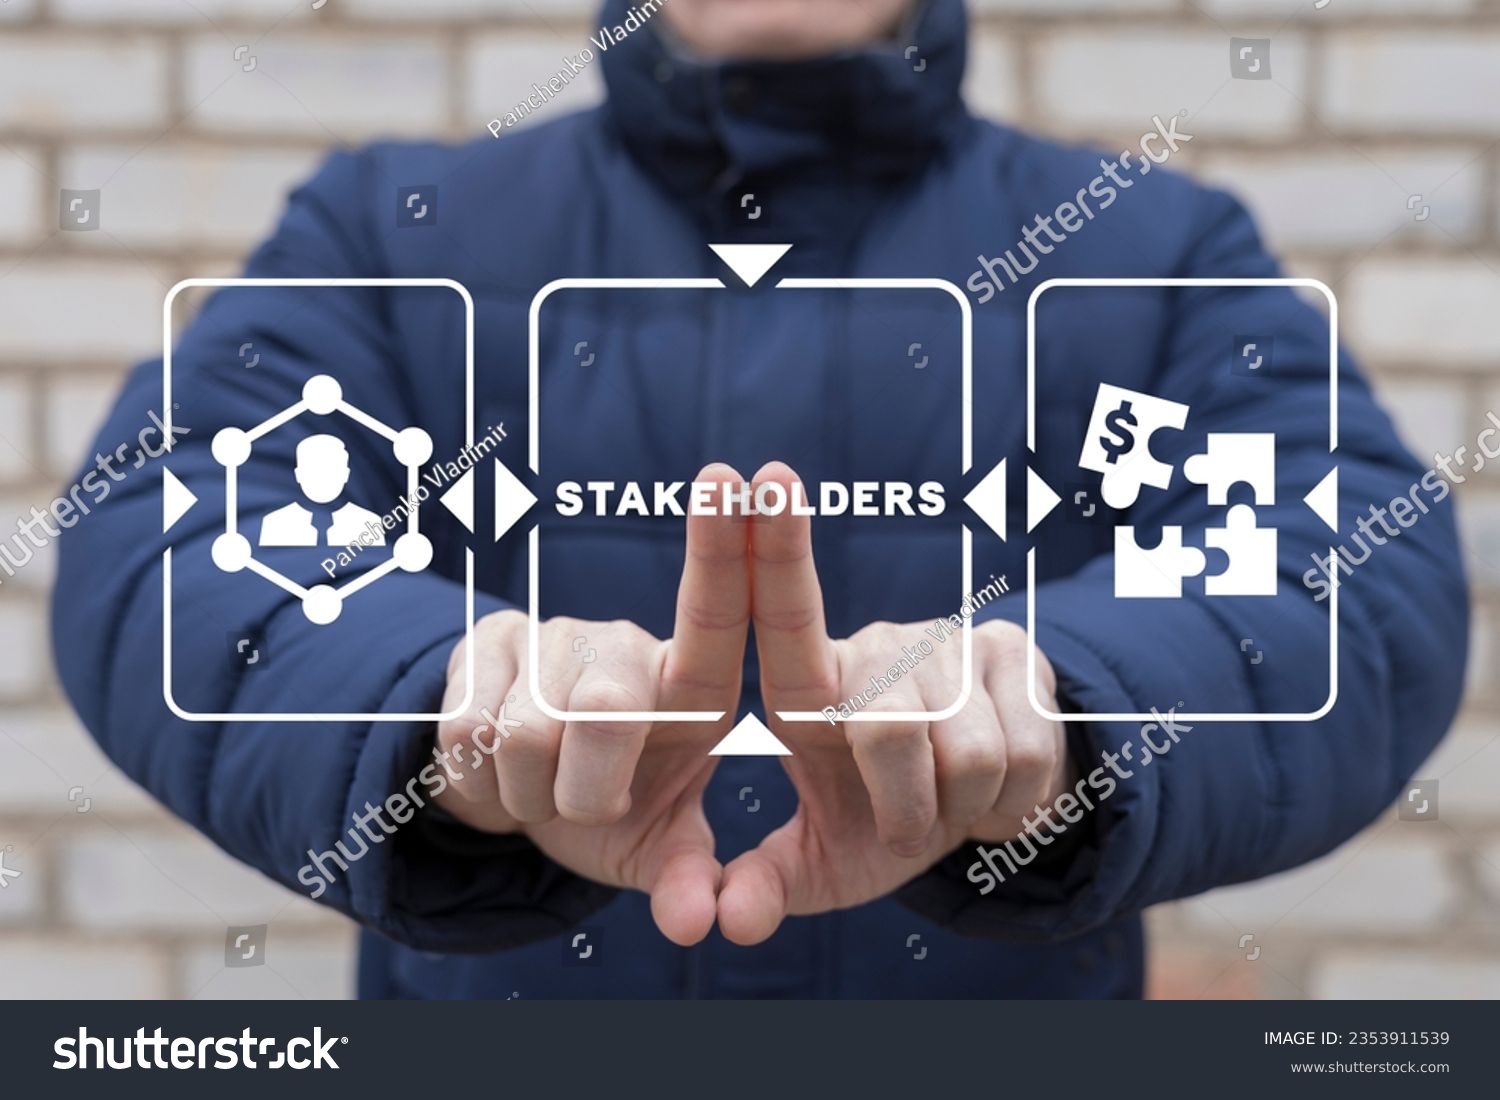 Man using virtual touch screen presses text: STAKEHOLDERS. Business and finance concept of stakeholder investing management. Different stakeholders contact collaboration for company organization.	 #2353911539